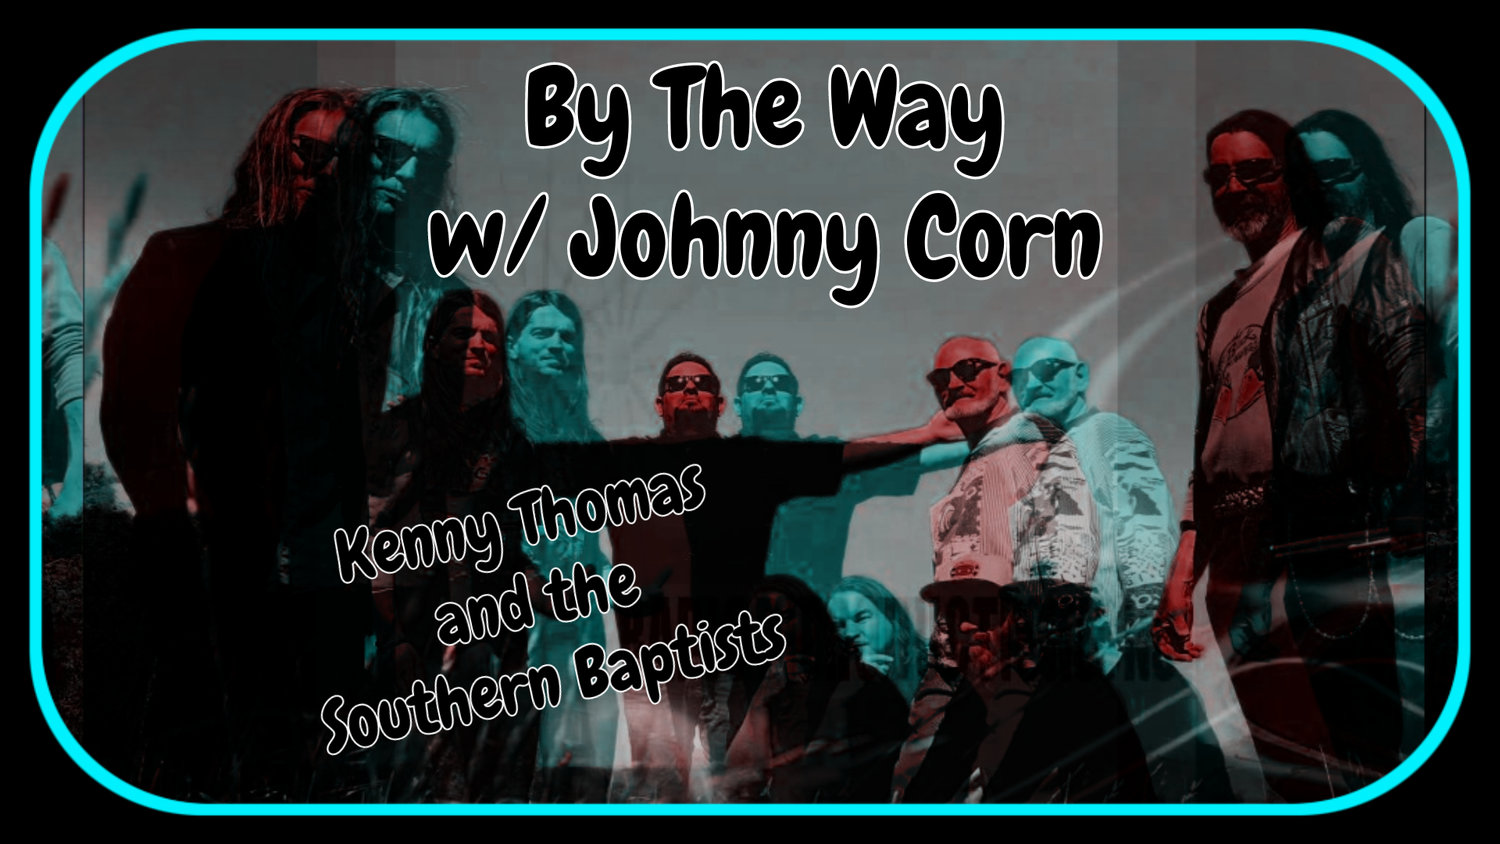 By The Way EP003 - Kenny Thomas And The Southern Baptists